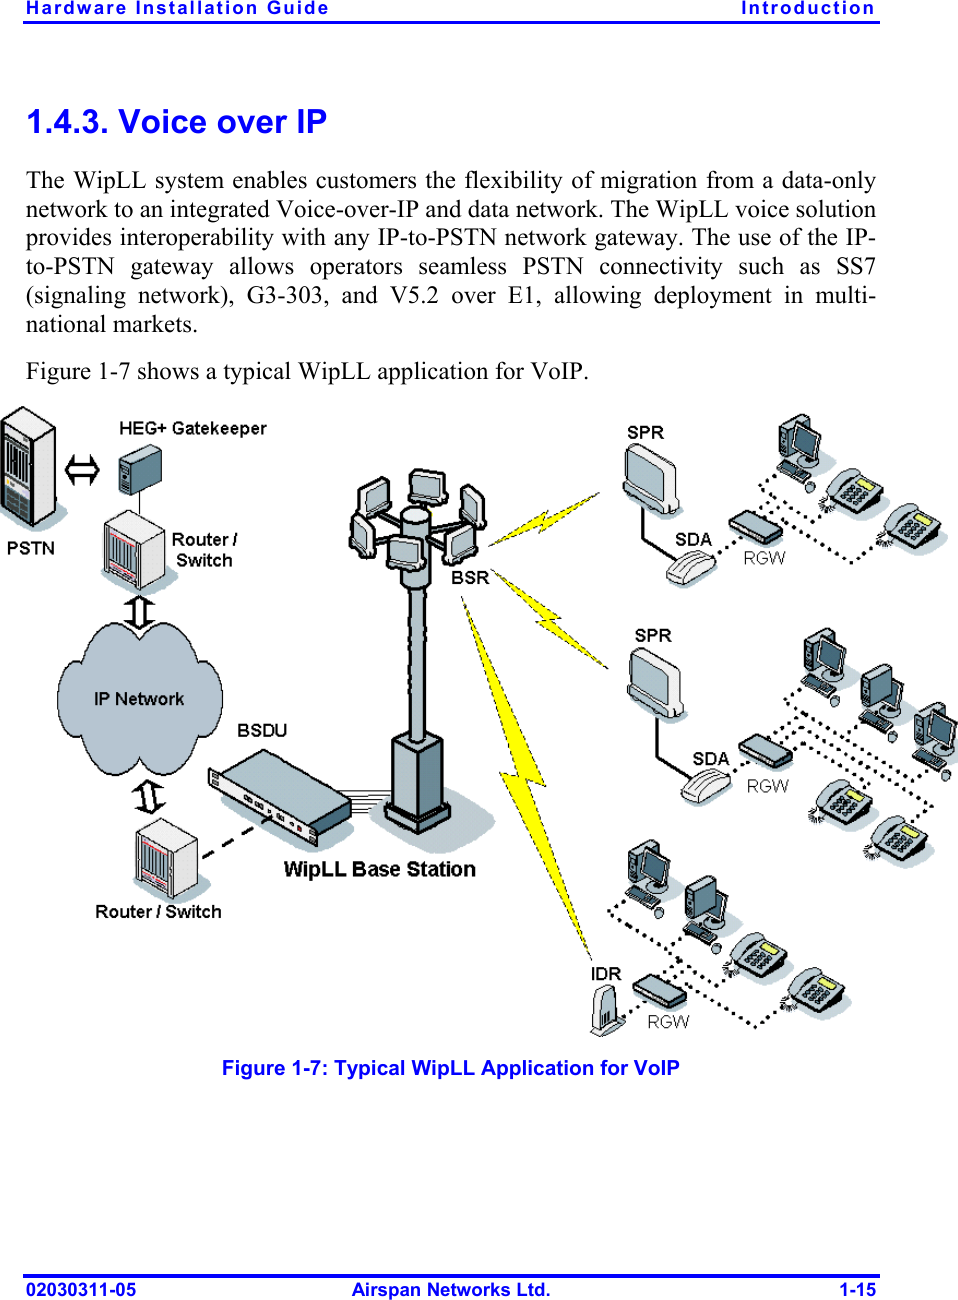 Hardware Installation Guide  Introduction 02030311-05  Airspan Networks Ltd.  1-15 1.4.3. Voice over IP The WipLL system enables customers the flexibility of migration from a data-only network to an integrated Voice-over-IP and data network. The WipLL voice solution provides interoperability with any IP-to-PSTN network gateway. The use of the IP-to-PSTN gateway allows operators seamless PSTN connectivity such as SS7 (signaling network), G3-303, and V5.2 over E1, allowing deployment in multi-national markets. Figure  1-7 shows a typical WipLL application for VoIP.  Figure  1-7: Typical WipLL Application for VoIP 